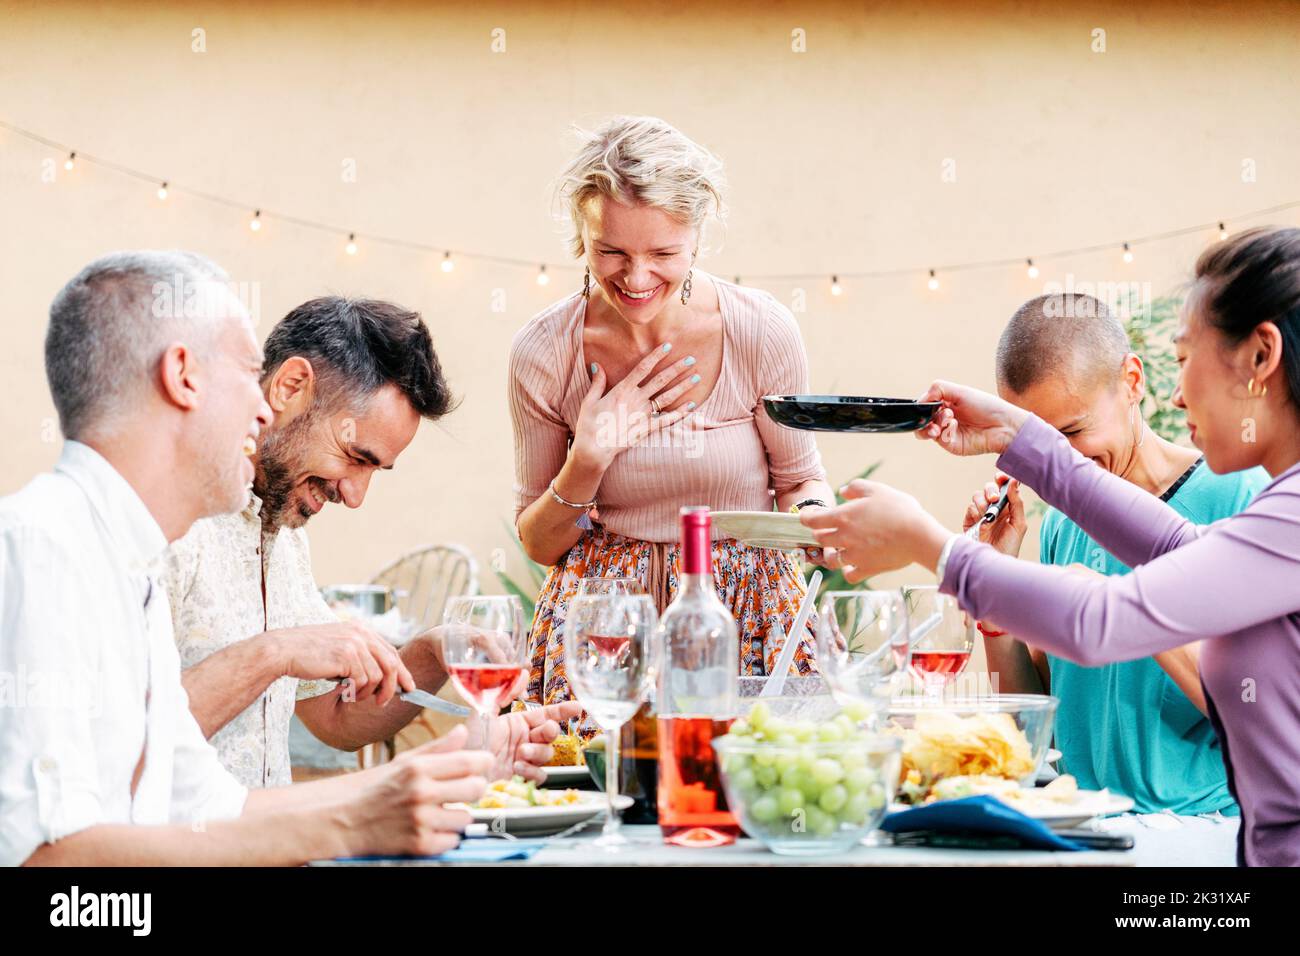 A group of adult friends sharing food in a barbeque party meeting with a lot of food and drink at table. Lifestyle concept. Stock Photo